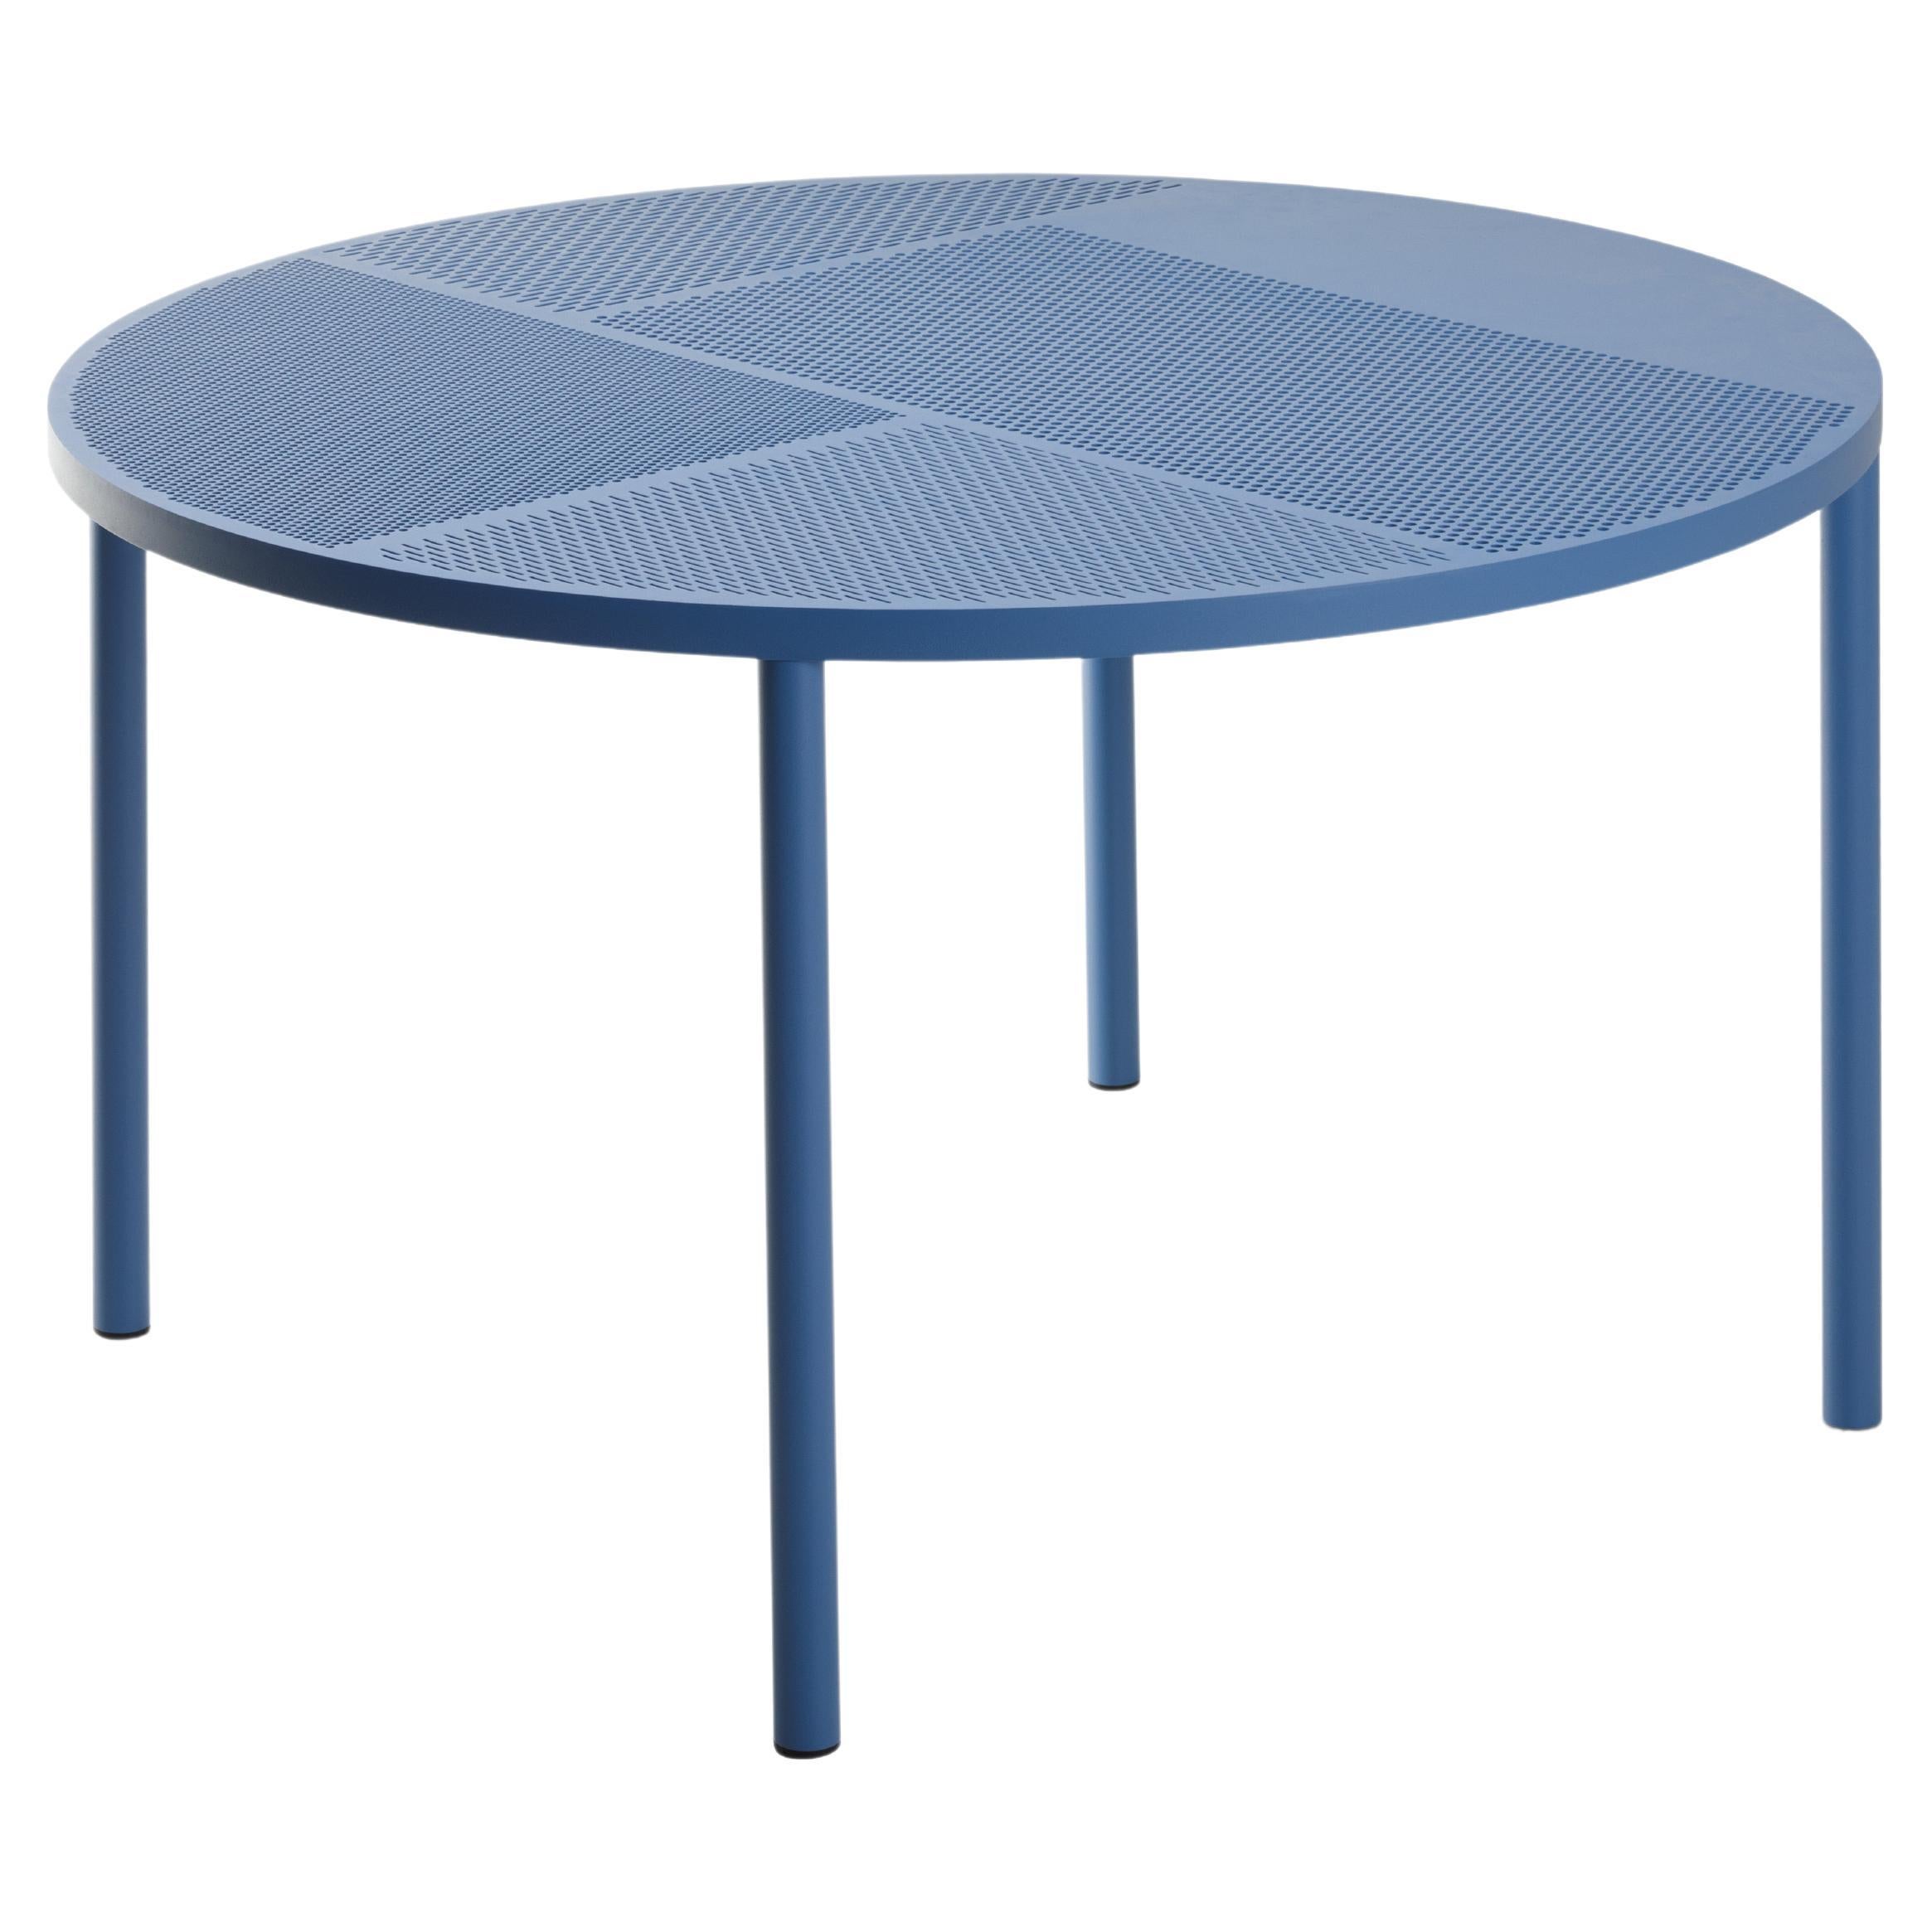 21st Century Modern Perforated Steel Round Table for Outdoor Neo Made in Italy